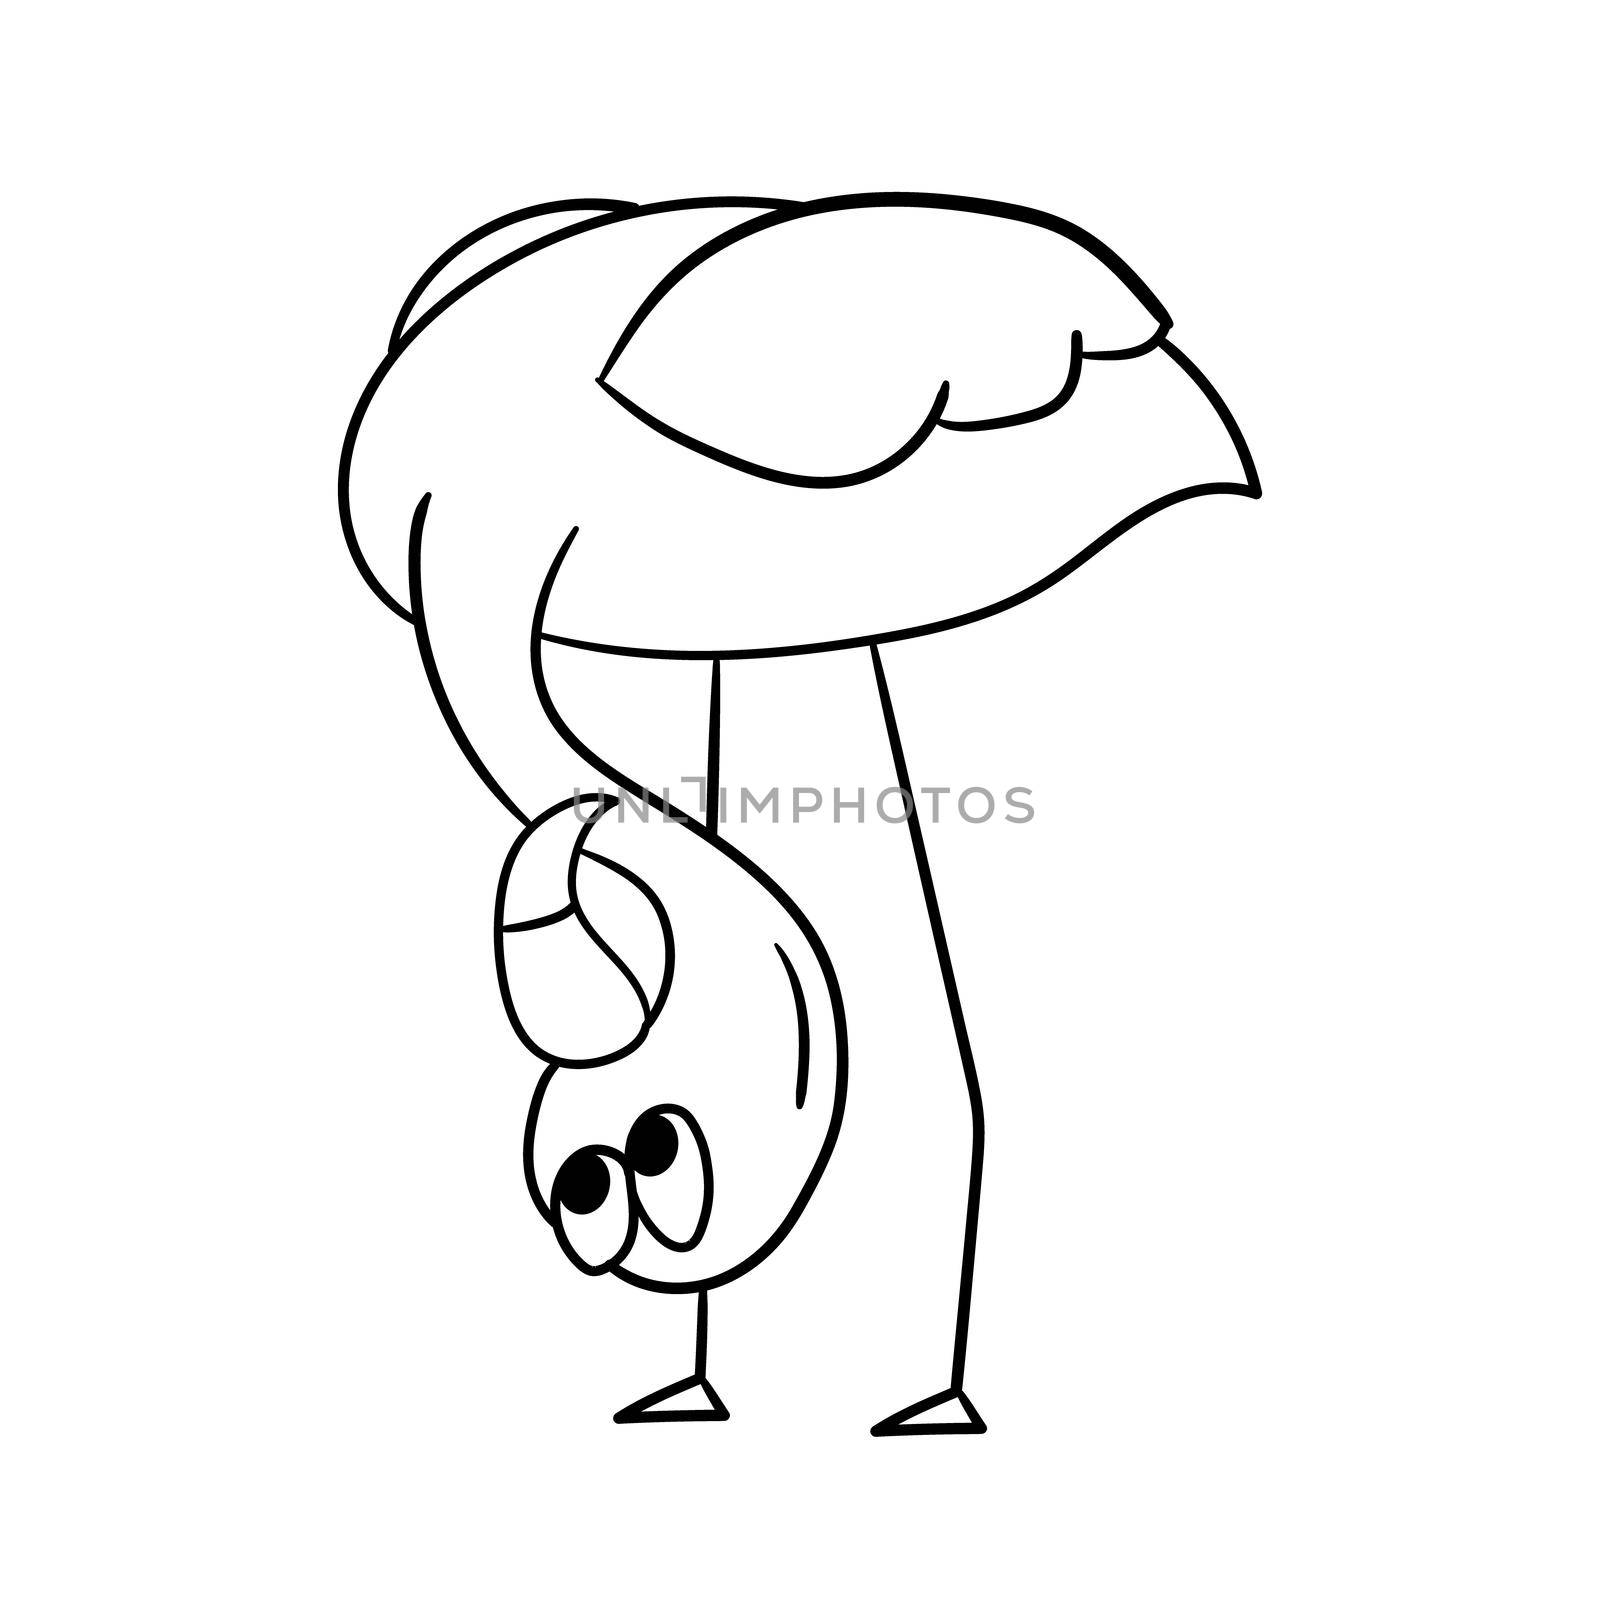 Cute cartoon flamingo with upside down head. Hand drawn style. Element for children design. One of the set. Coloring